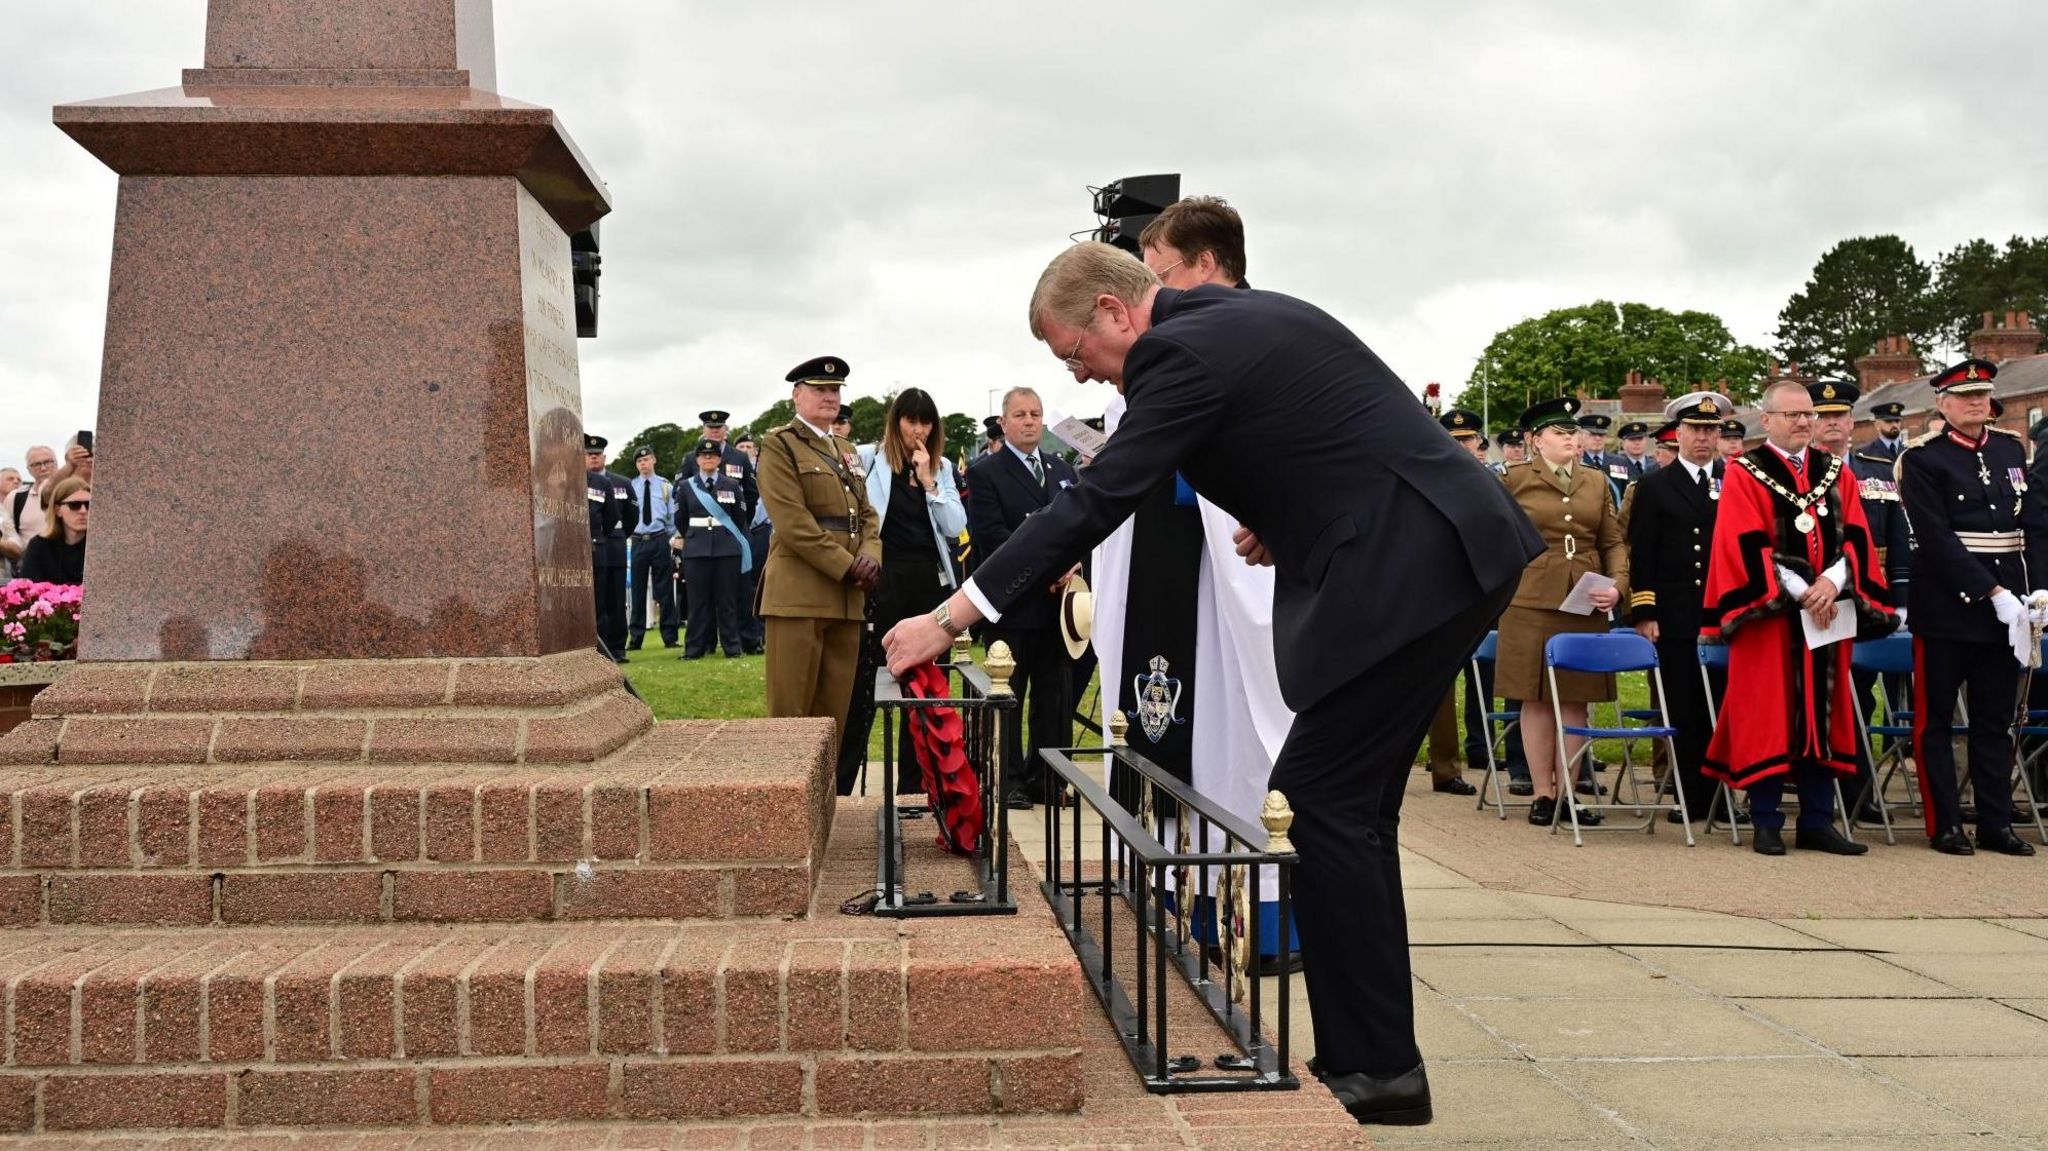 Lord Caine Parliamentary Under-Secretary of State for Northern Ireland lays a wreath in honour of the sacrifice of all involved in D-Day